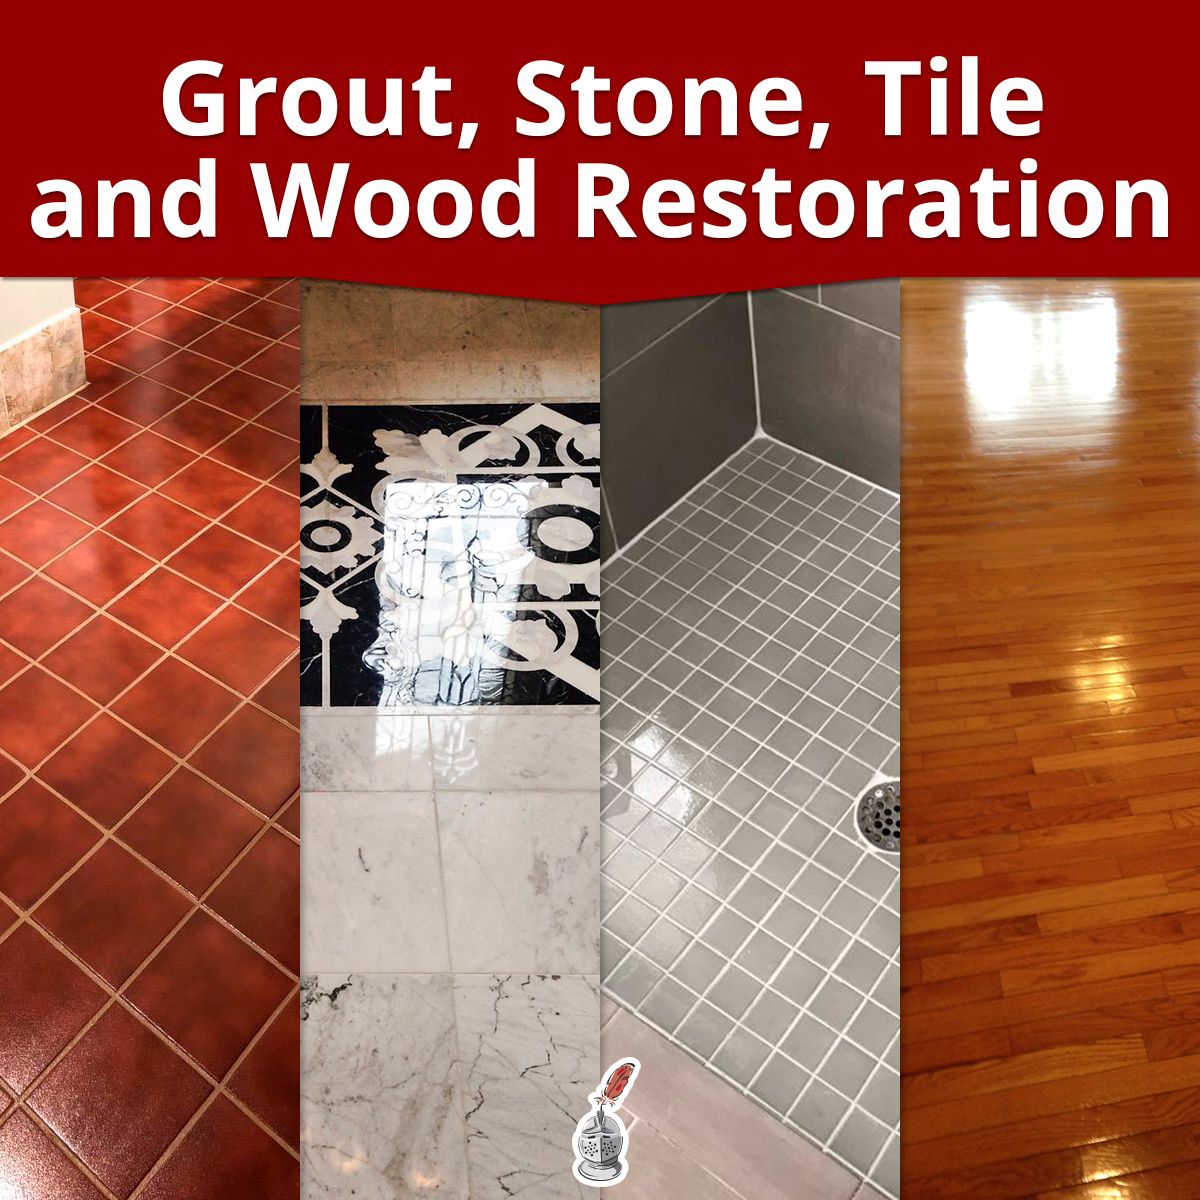 Grout, Stone, Tile and Wood Restoration